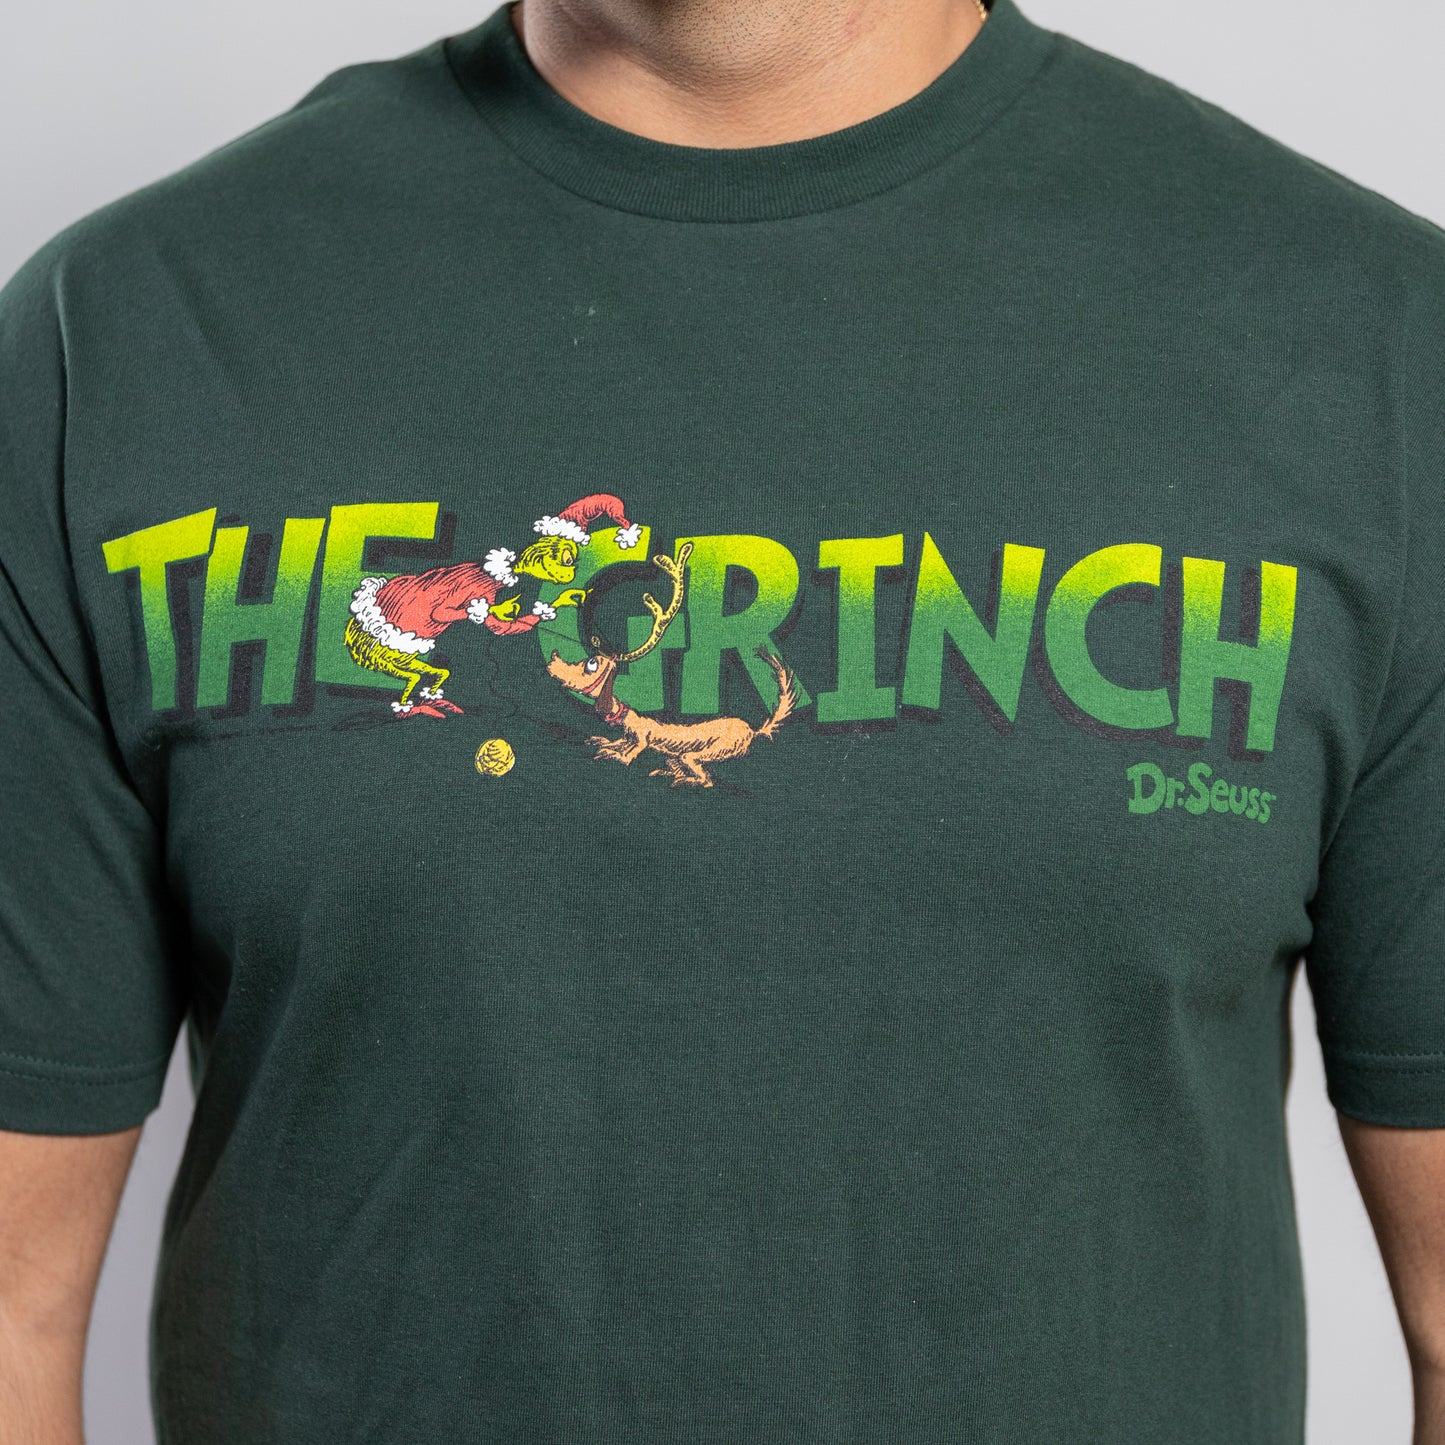 2001 The Grinch Tee